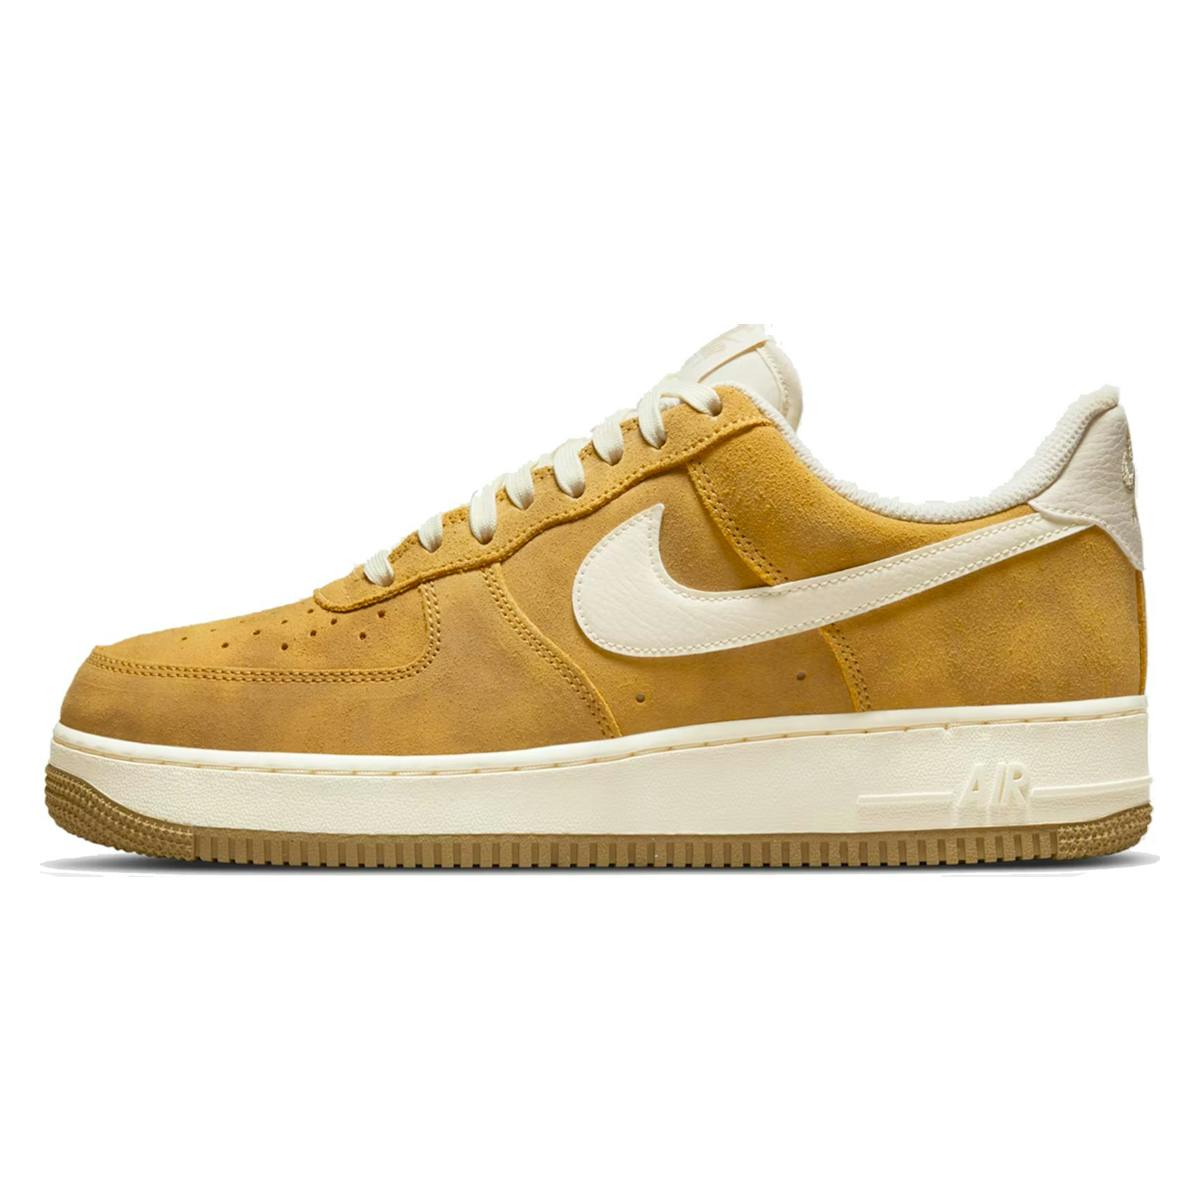 Nike Air Force 1 '07 "Sanded Gold"